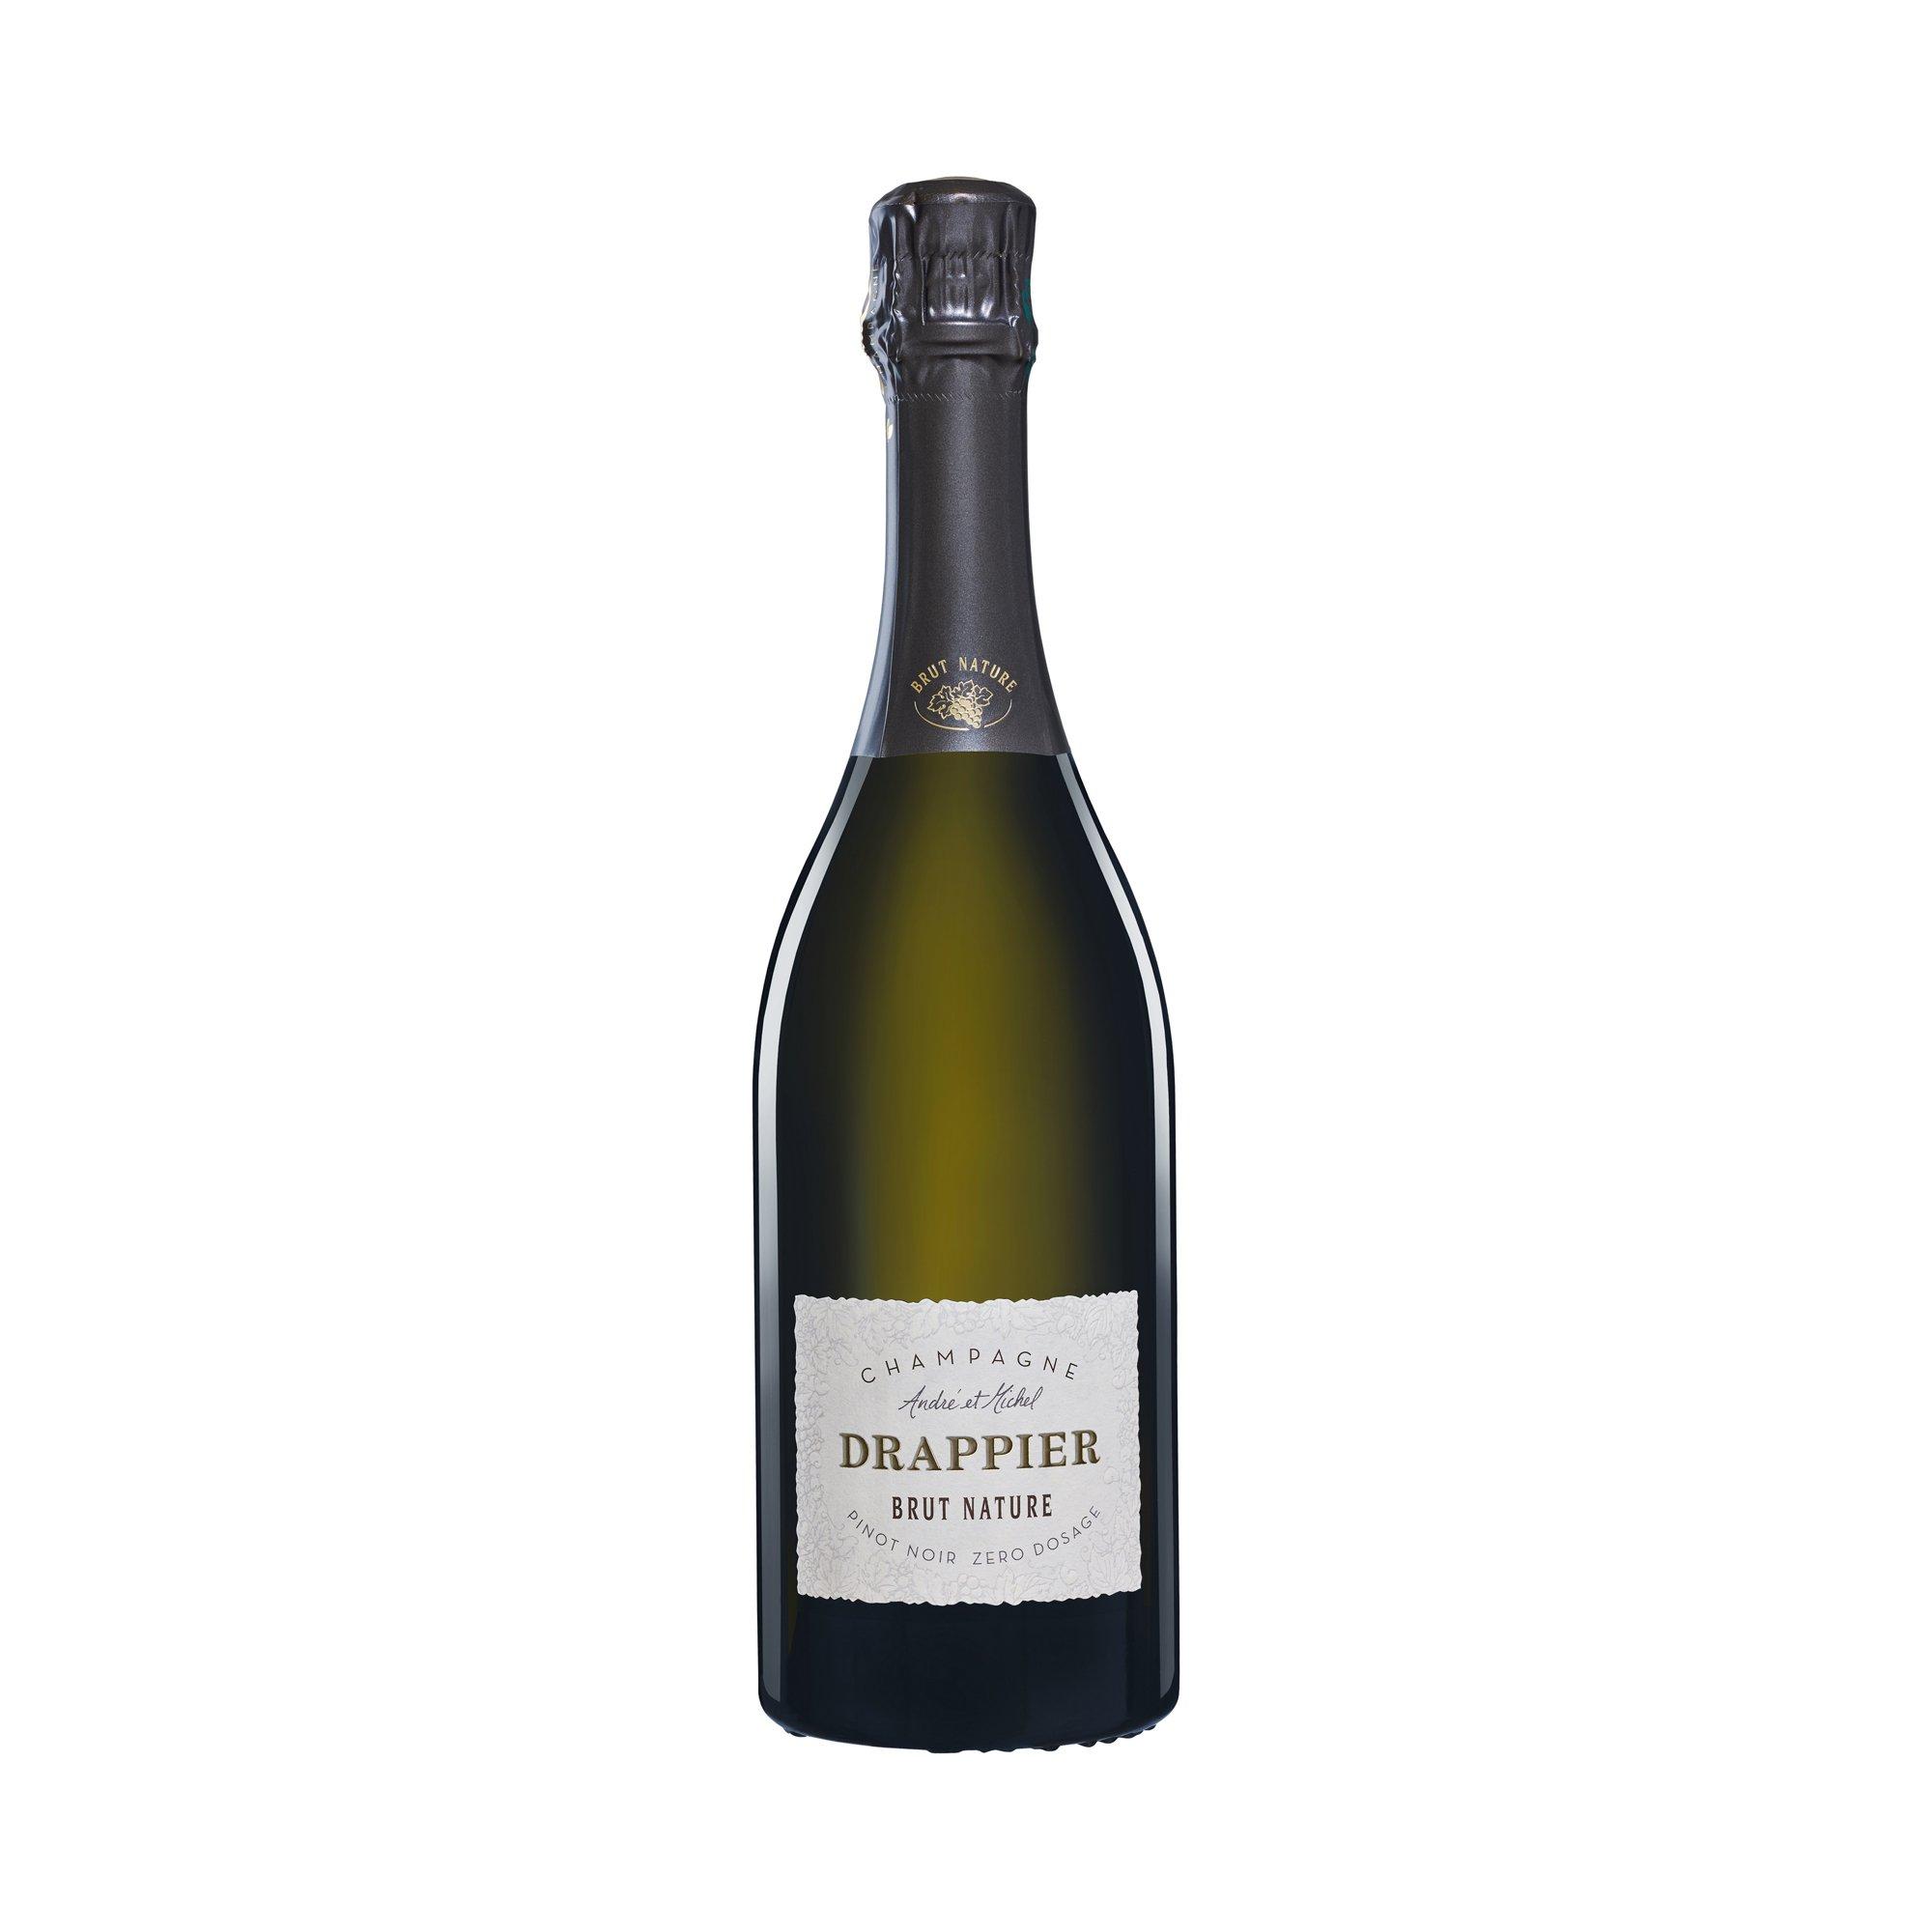 Image of CHAMPAGNE DRAPPIER Brut Nature, Champagne AOC - 75 cl